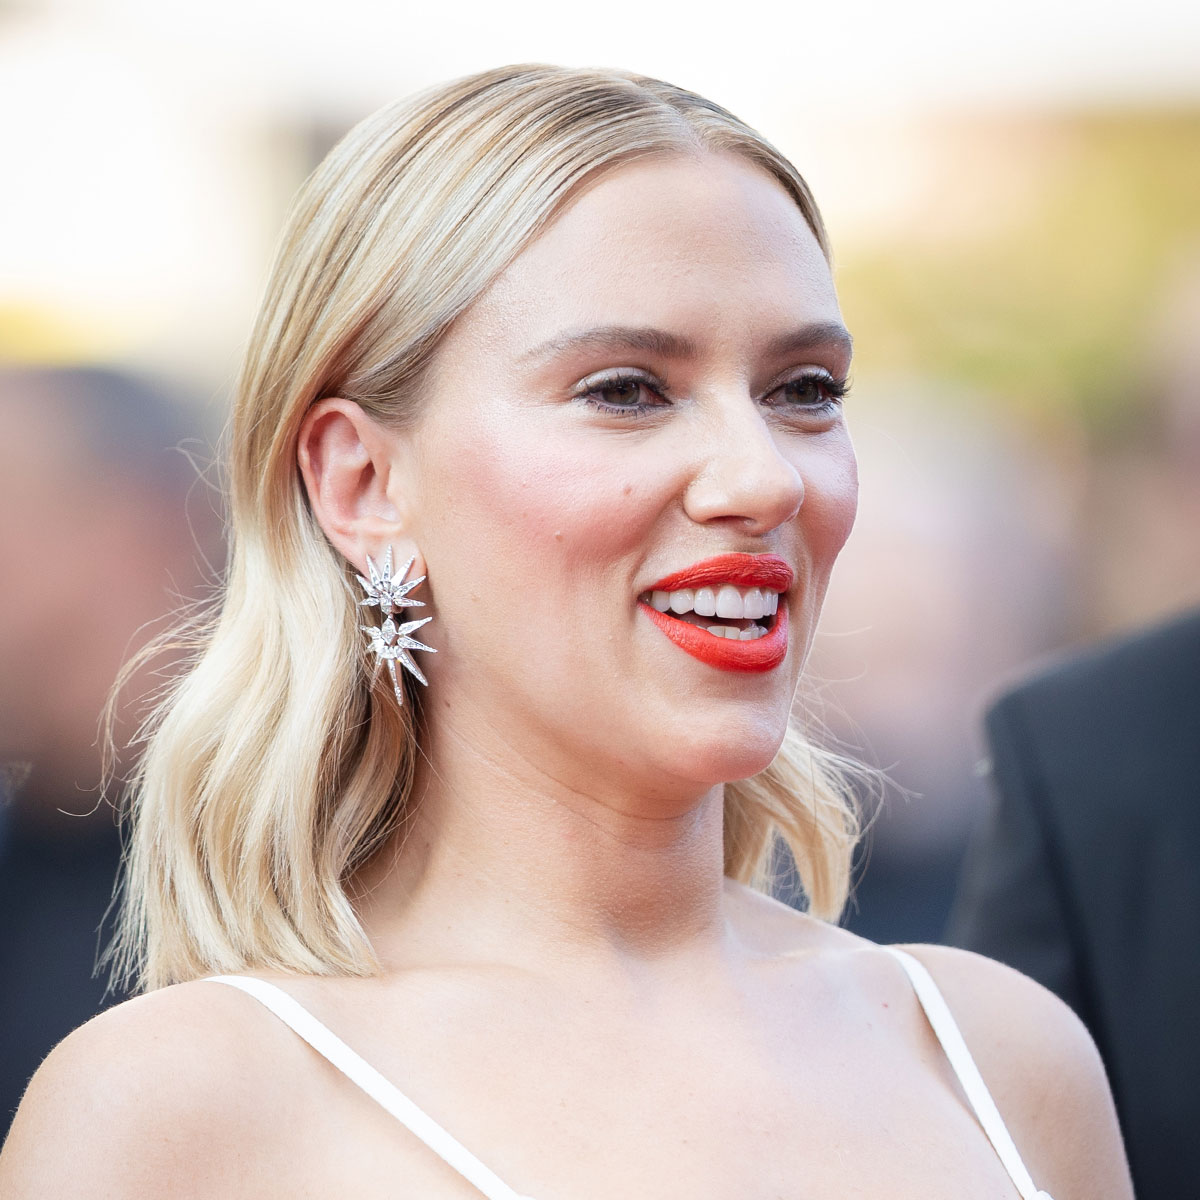 Scarlett Johansson Proves the Exposed Bra Illusion Is the Next Red Carpet  Trend